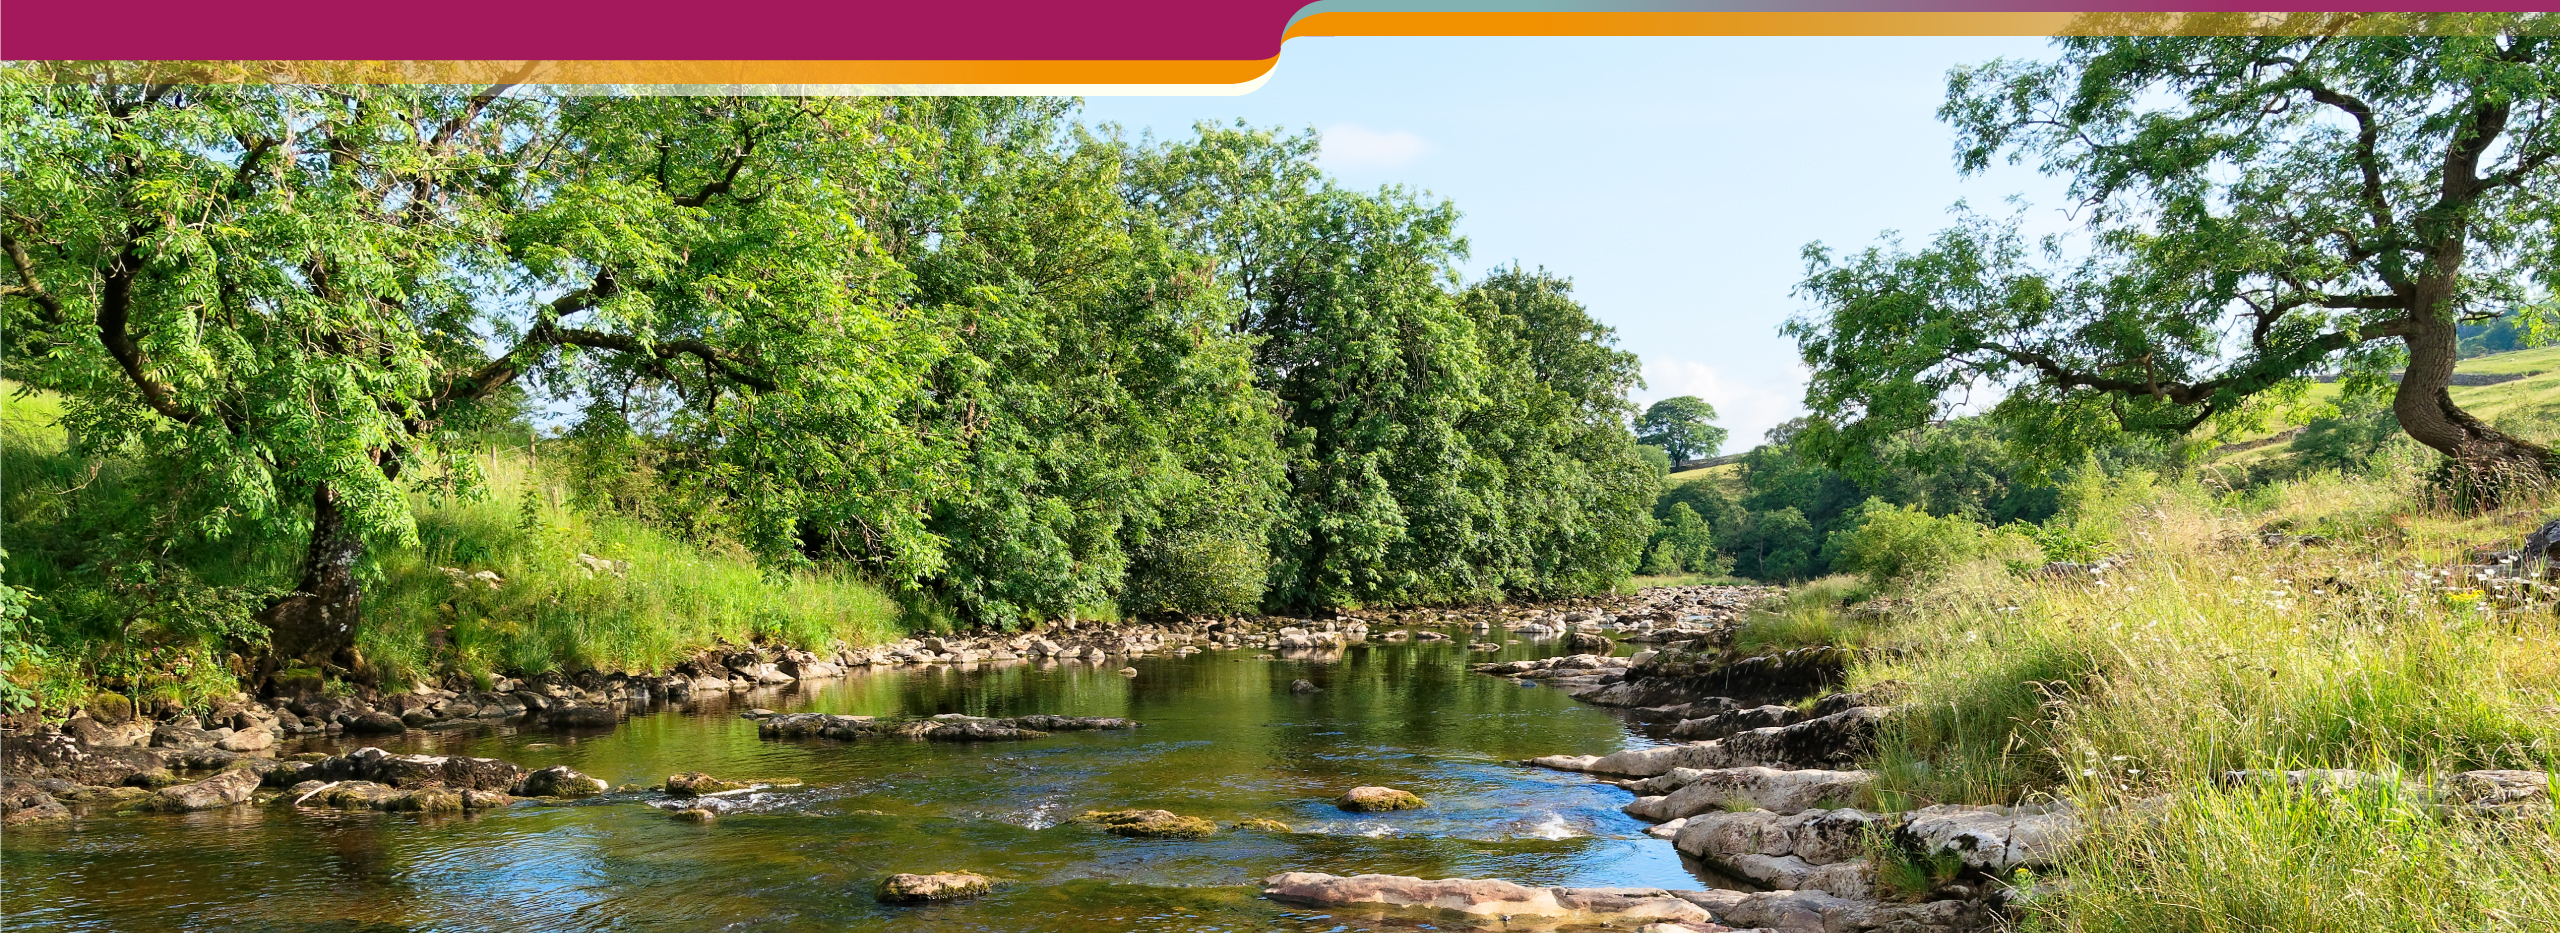 River Ribble, North Yorkshire. Business Owl is proud to call the beautiful county of North Yorkshire home.